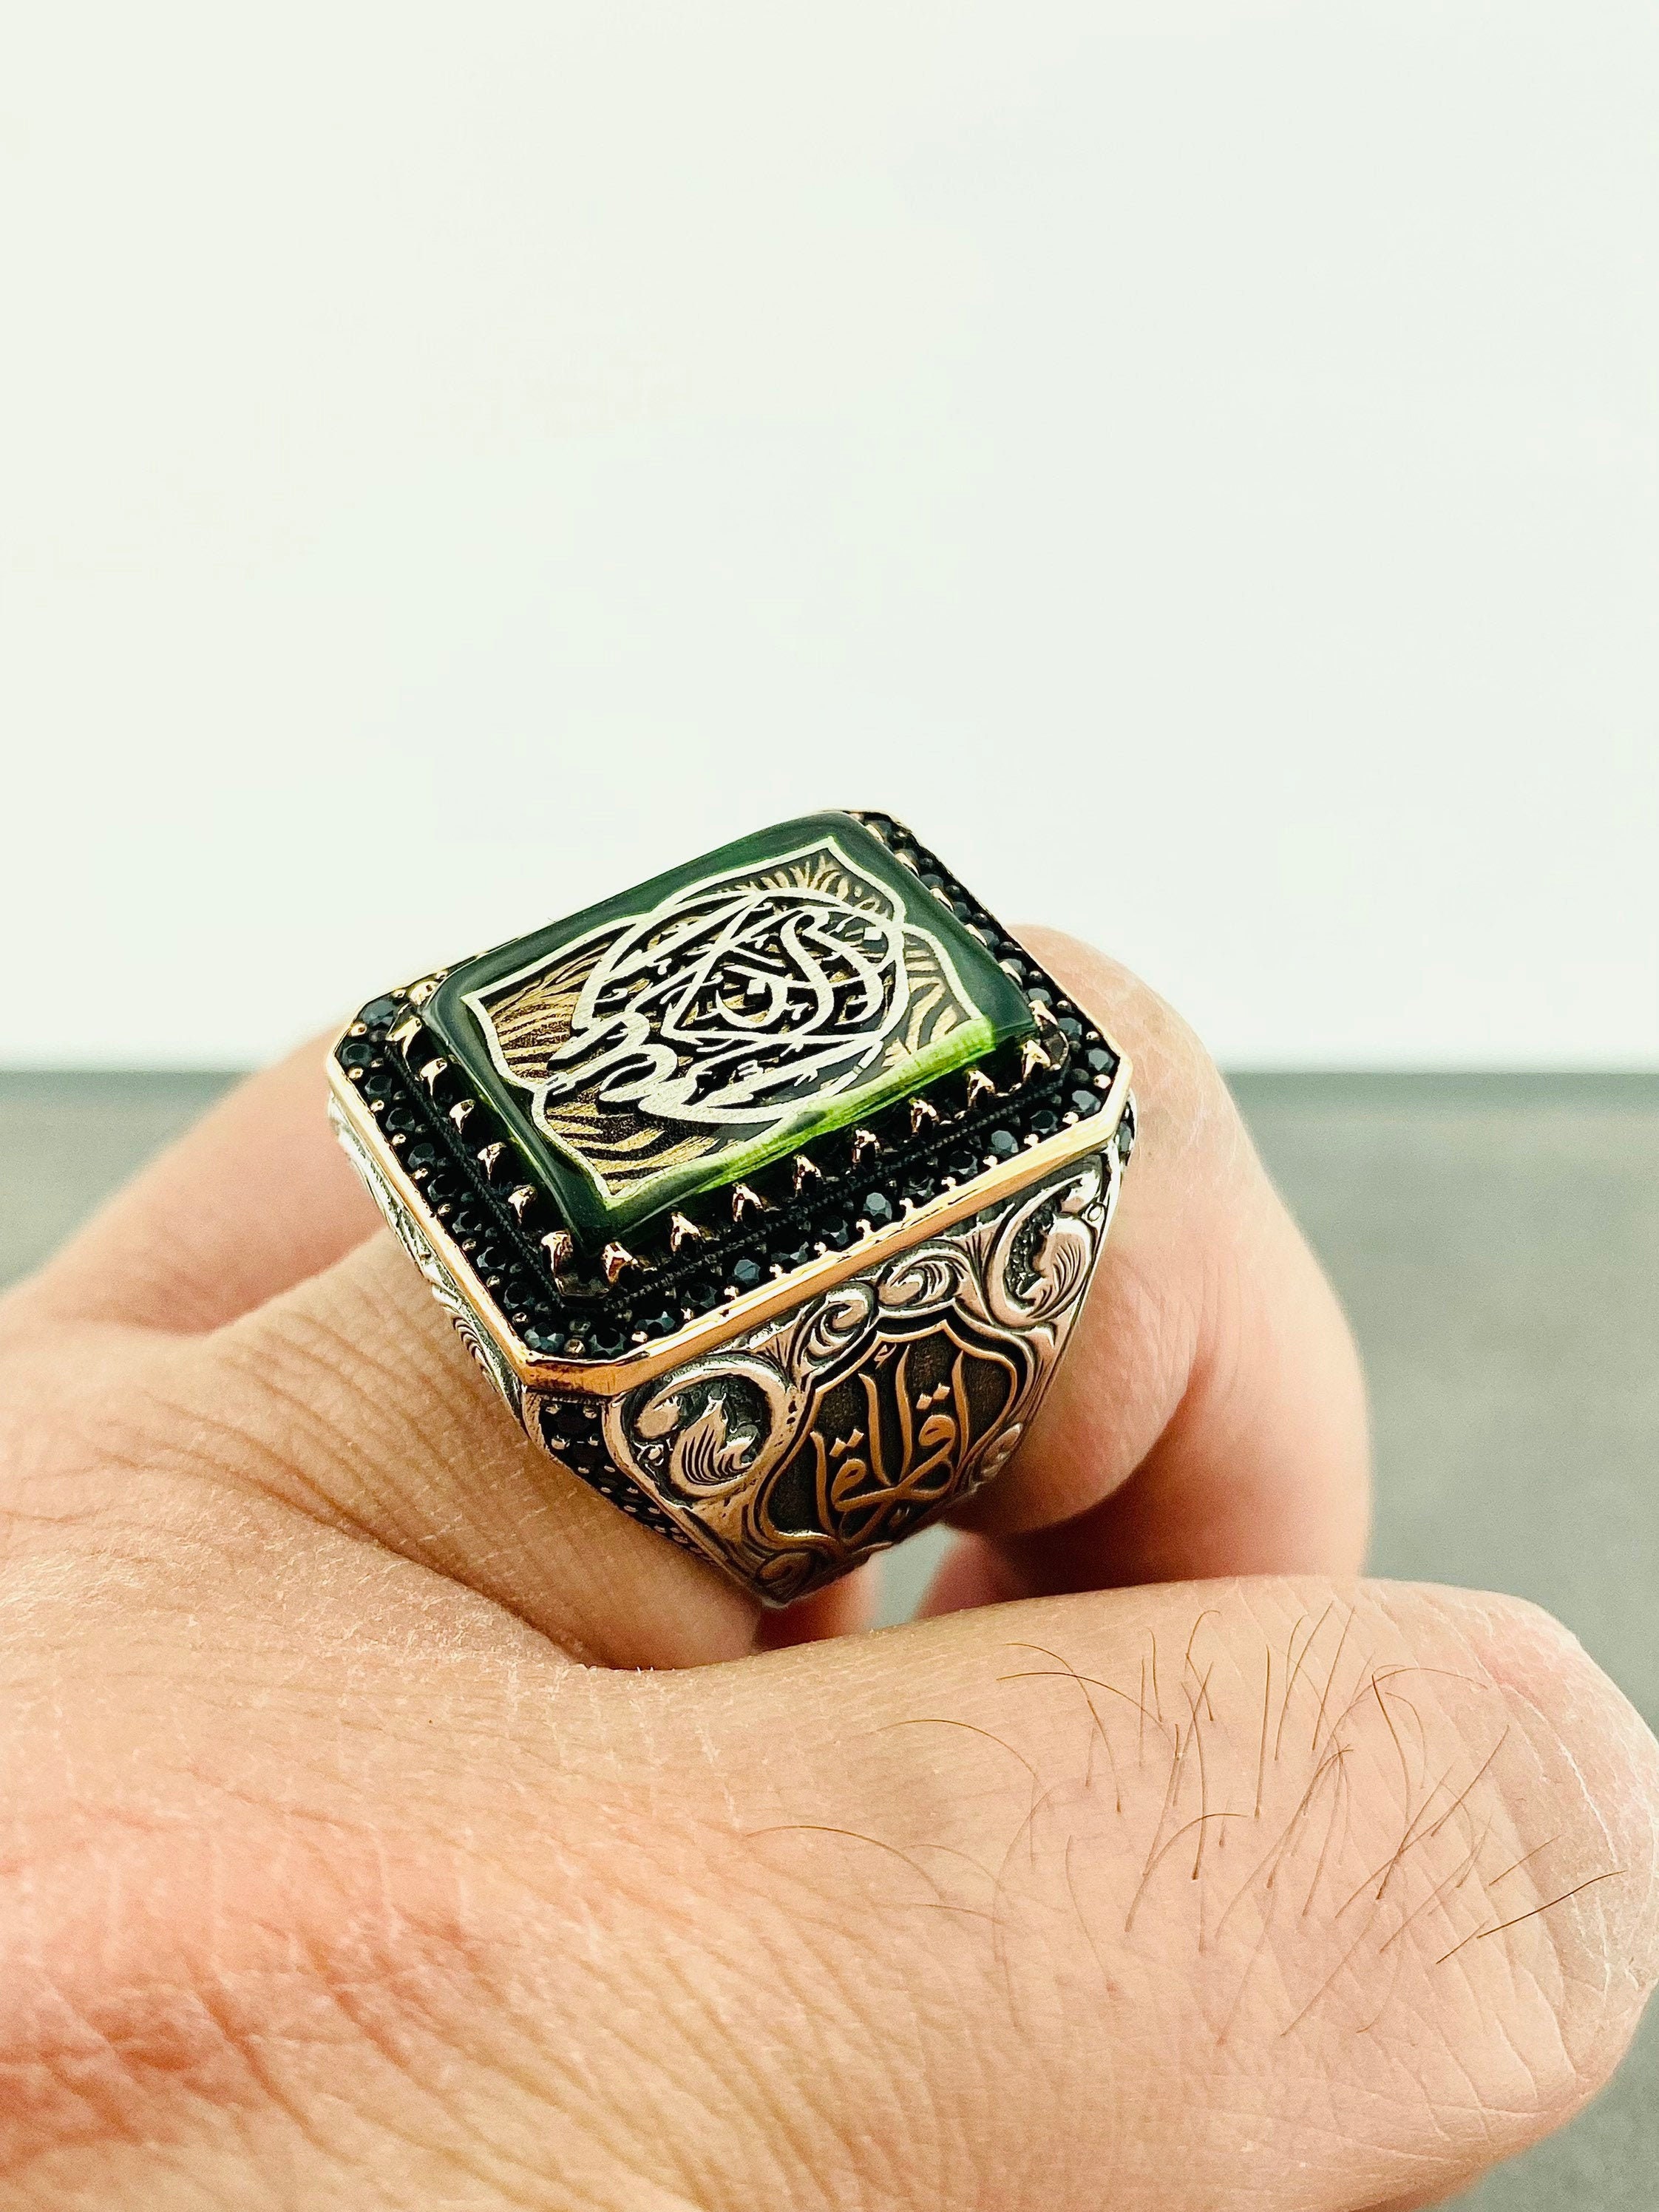 Islamic Ring for Men Muslim Islam Allah Rings Star and Crescent Muhammed  Rings Antique Green Stone Islam Arab Jewelry Gift,7 : Amazon.com.au:  Clothing, Shoes & Accessories